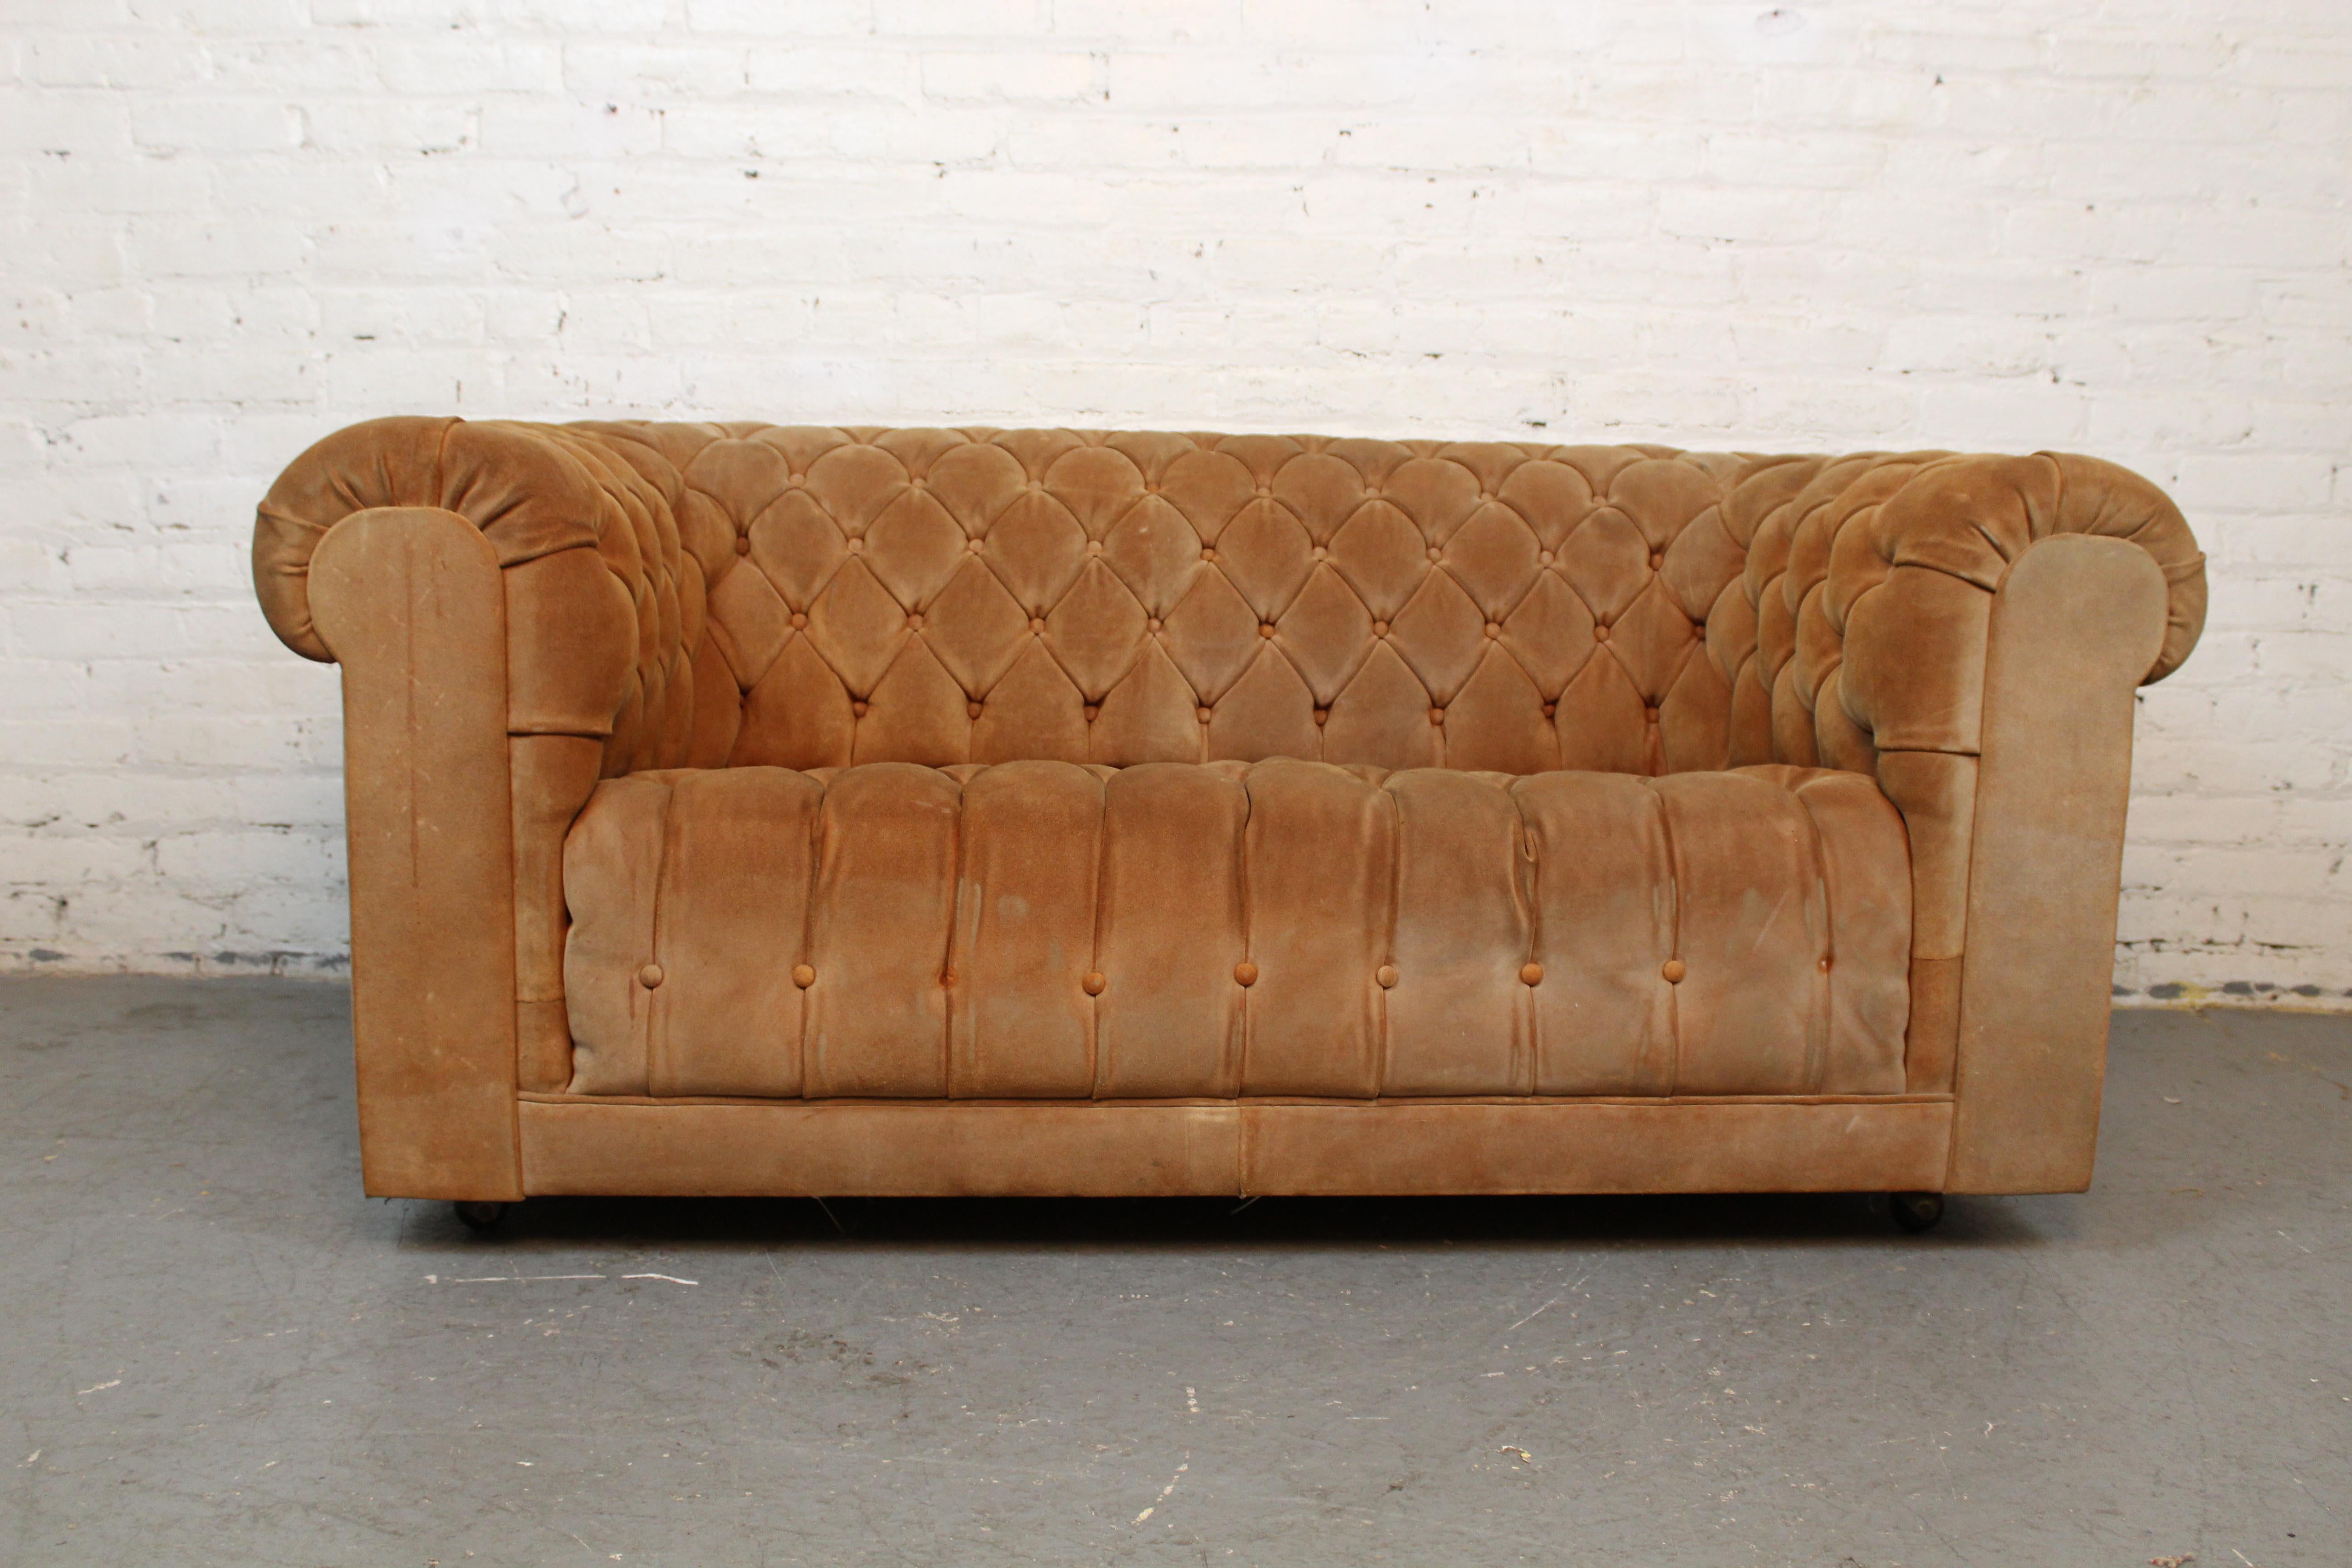 English Mid-Century Vintage Caramel Suede Chesterfield Sofa For Sale